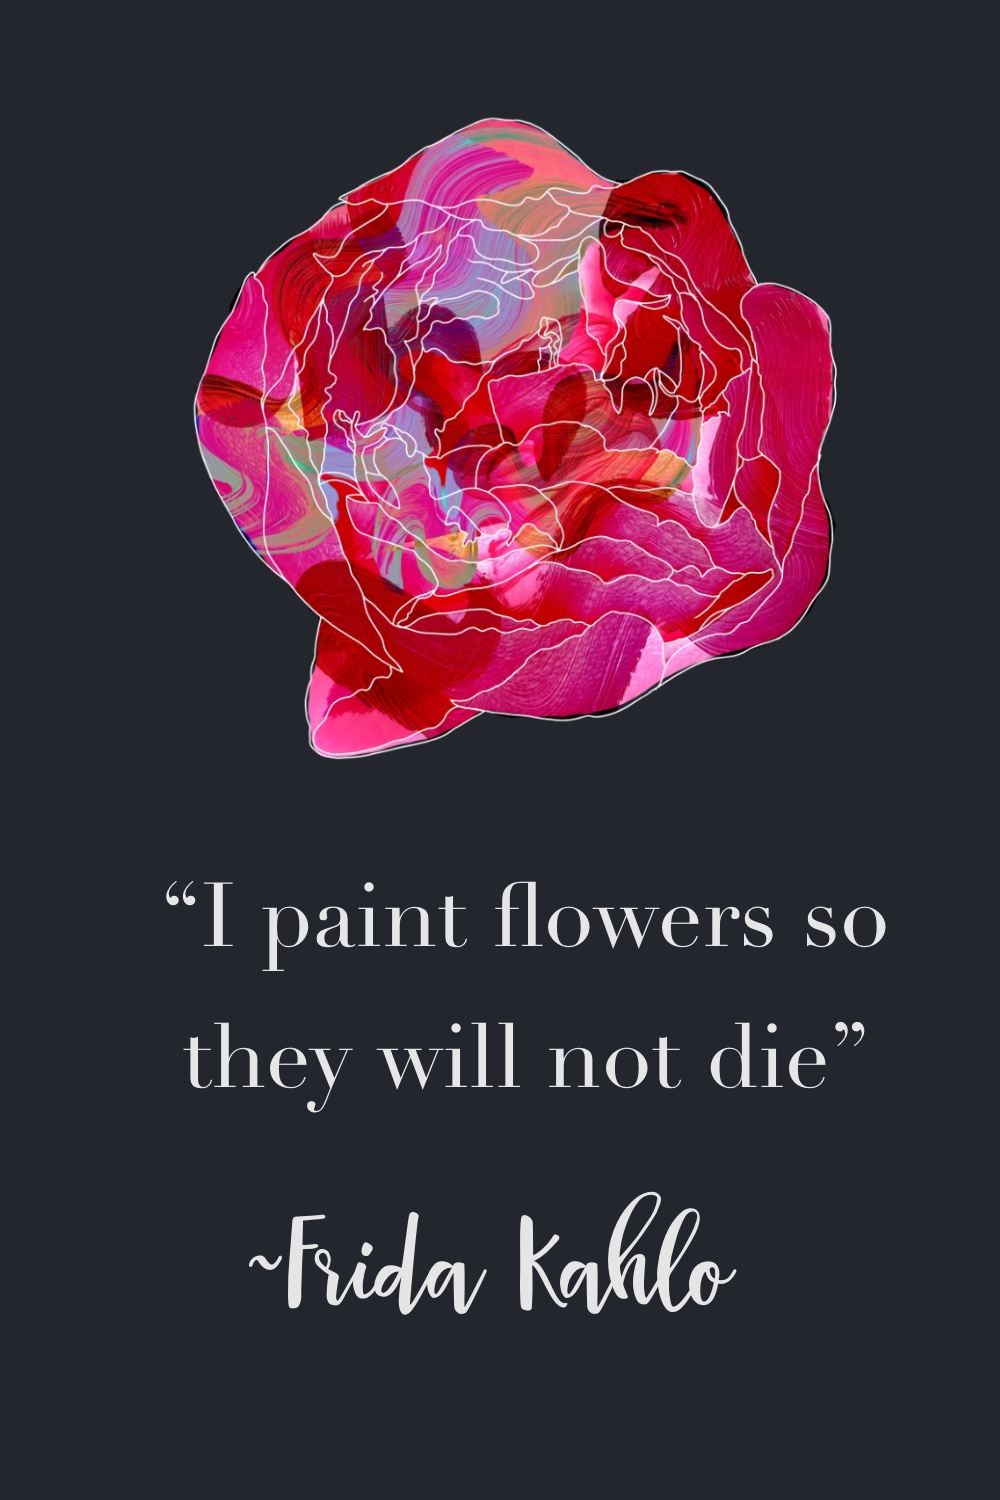 Frida Kahlo Quote on Flowers